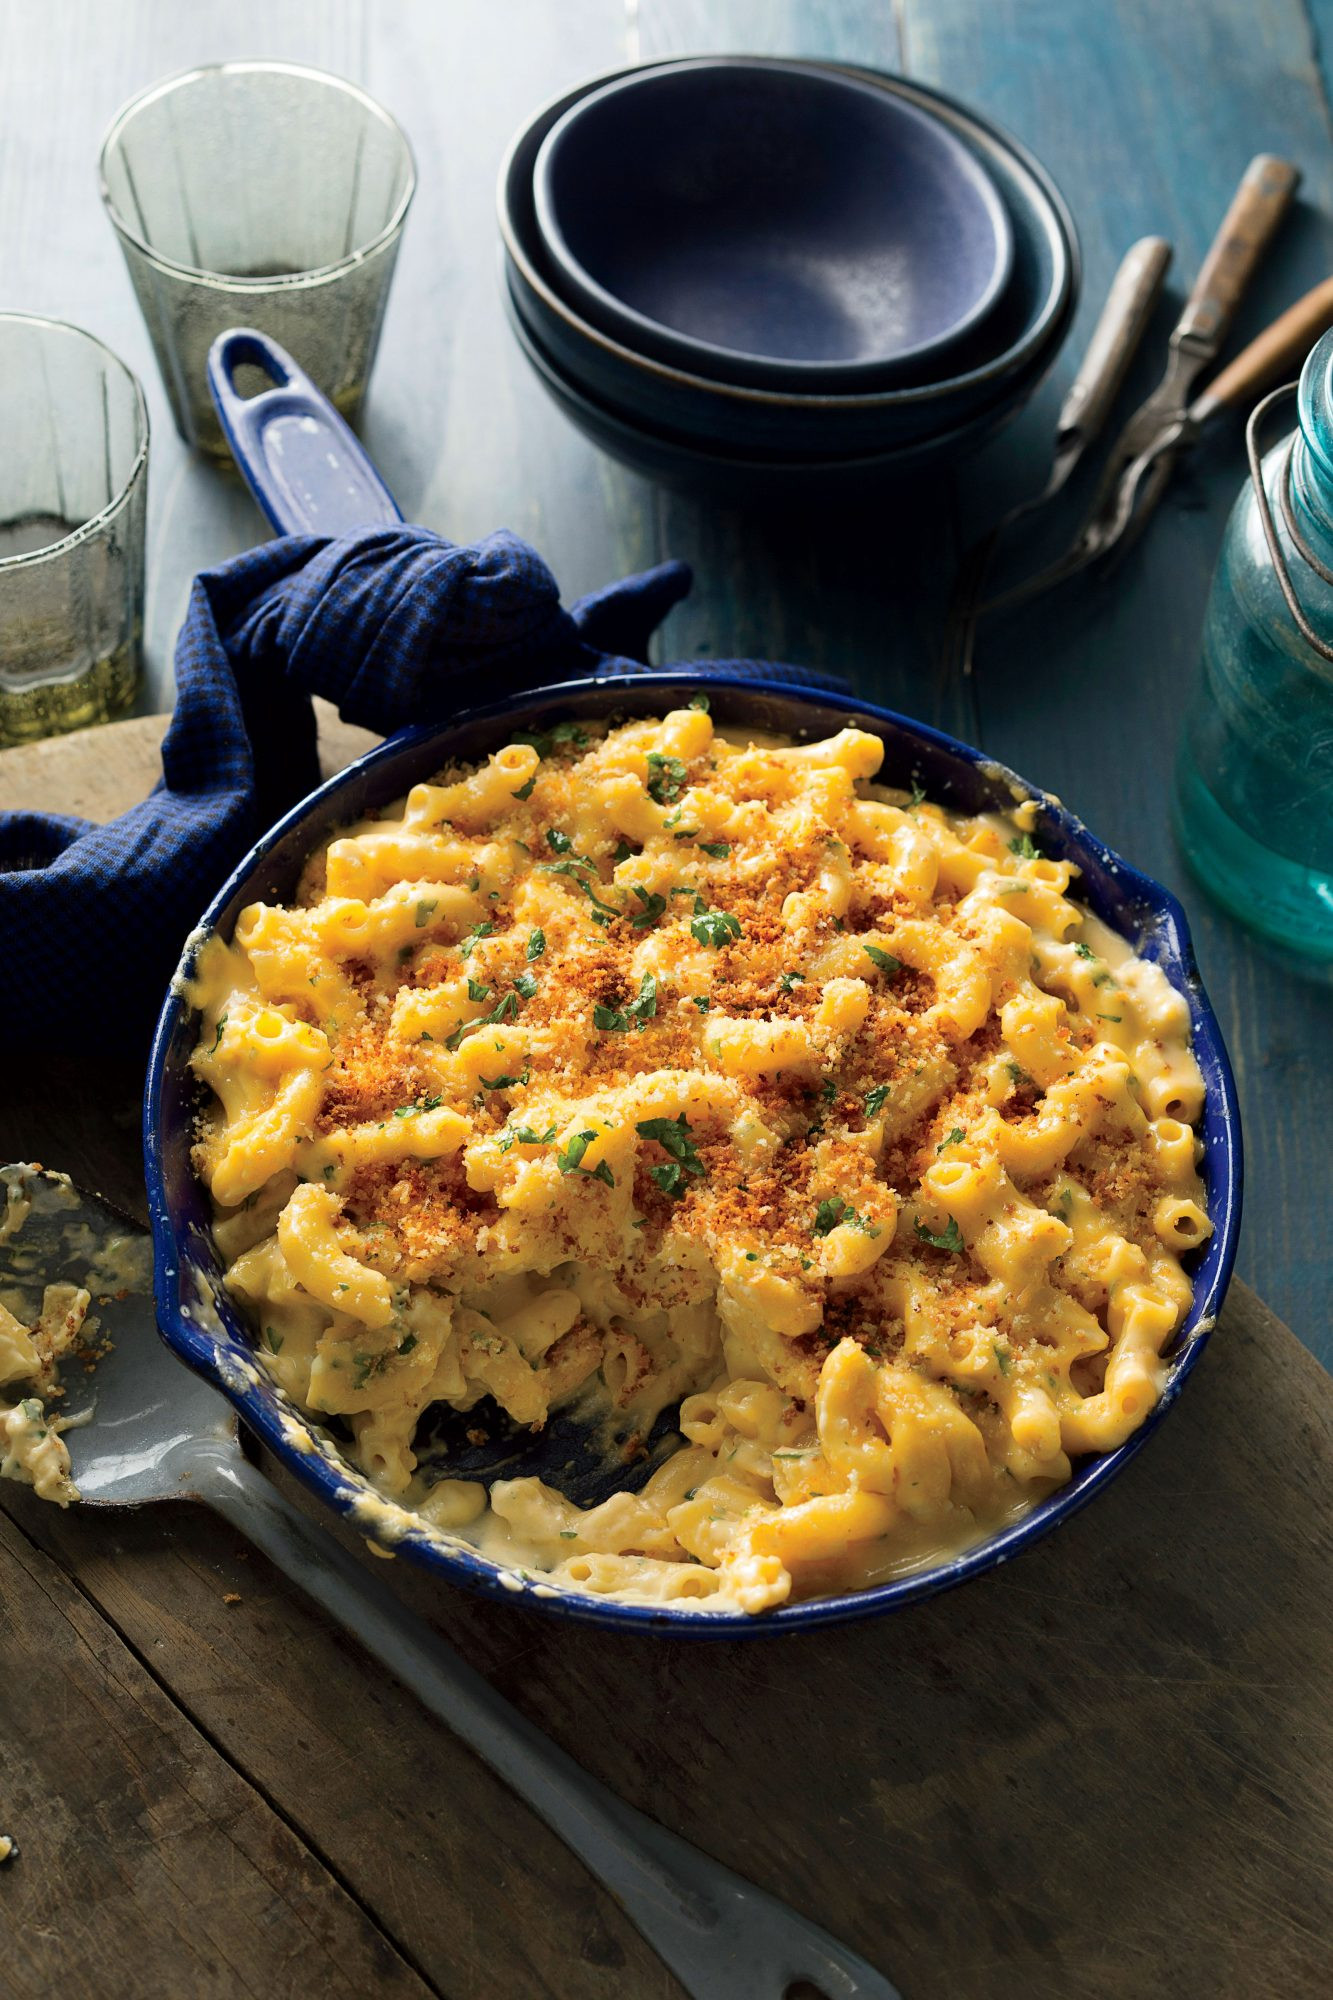 Baked Macaroni And Cheese Southern Living
 creamy macaroni and cheese southern living